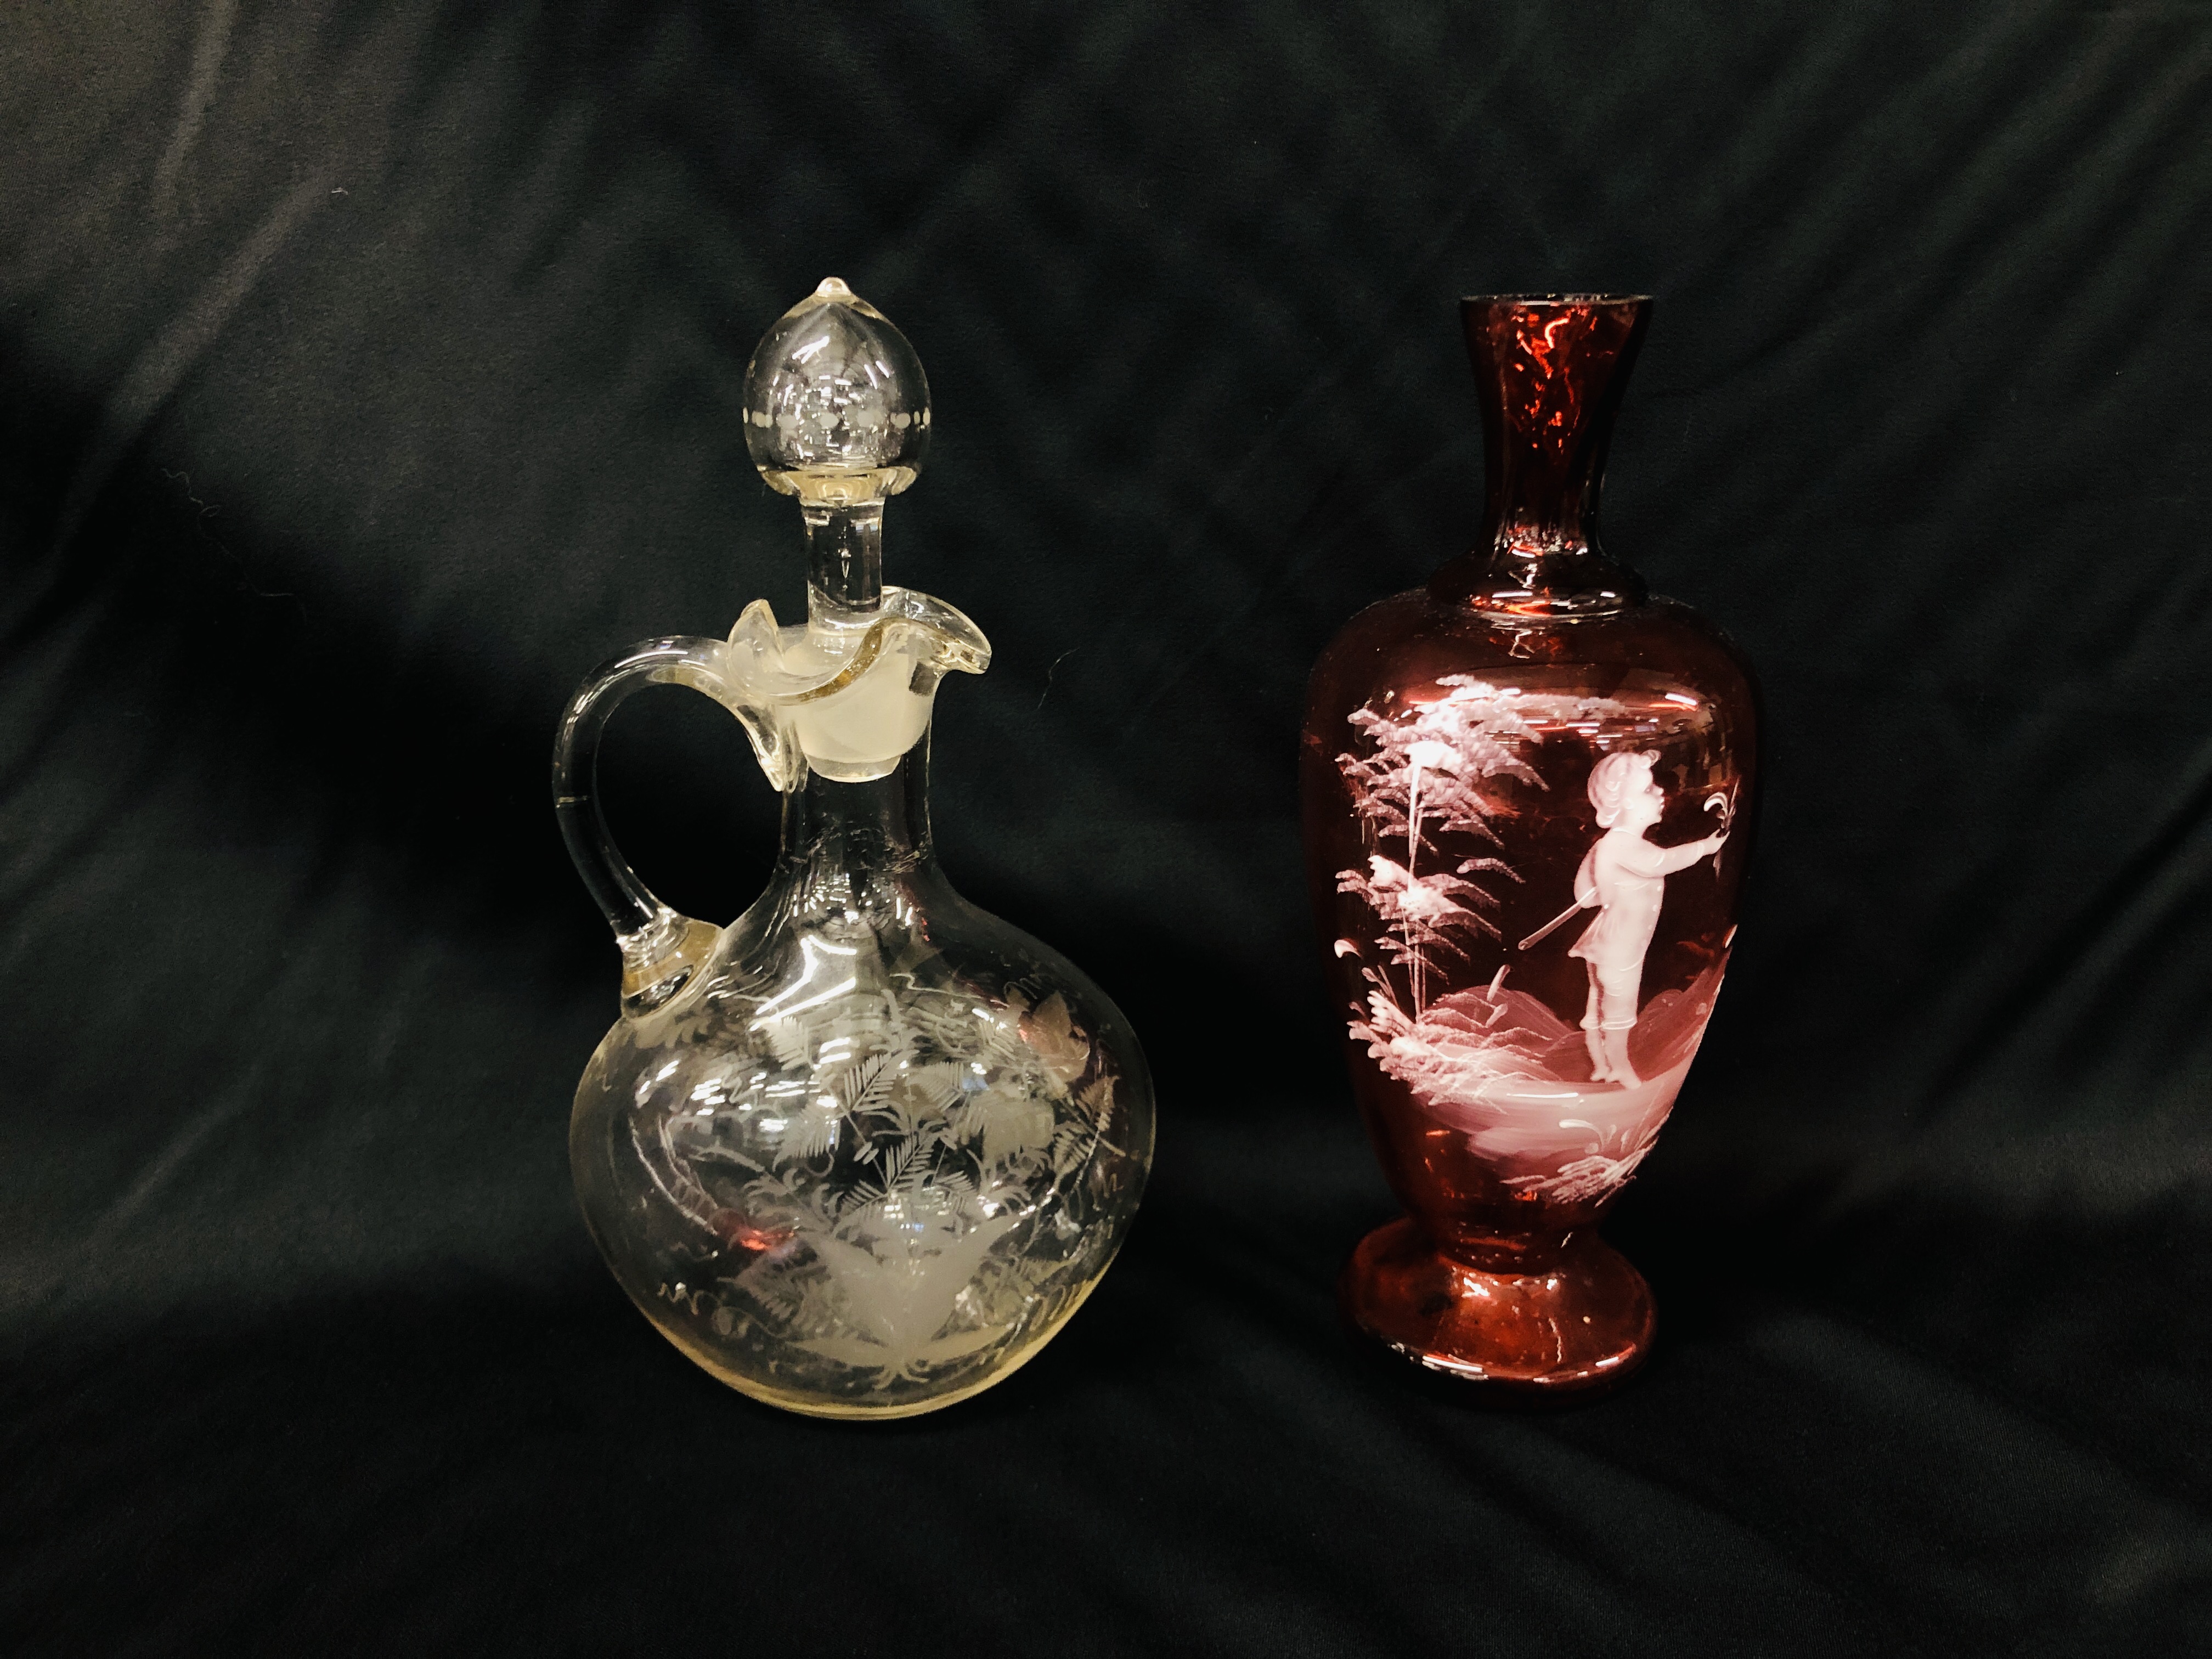 MARY GREGORY CRANBERRY VASE, VINTAGE CLEAR GLASS DECANTER WITH ETCHED FERN AND BIRD DESIGN.